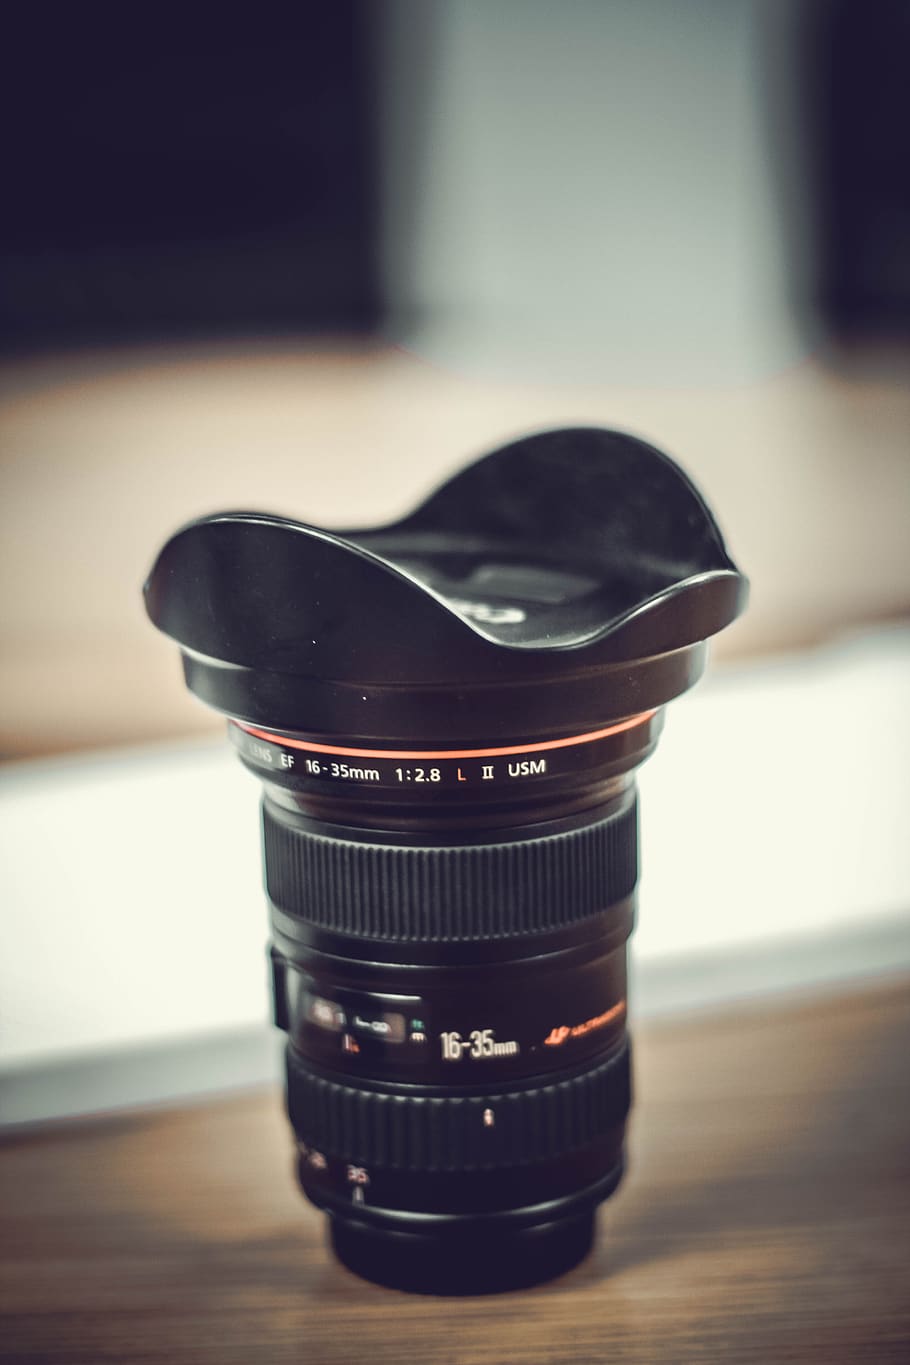 camera, lens, black, photography, blur, table, focus on foreground, technology, close-up, indoors